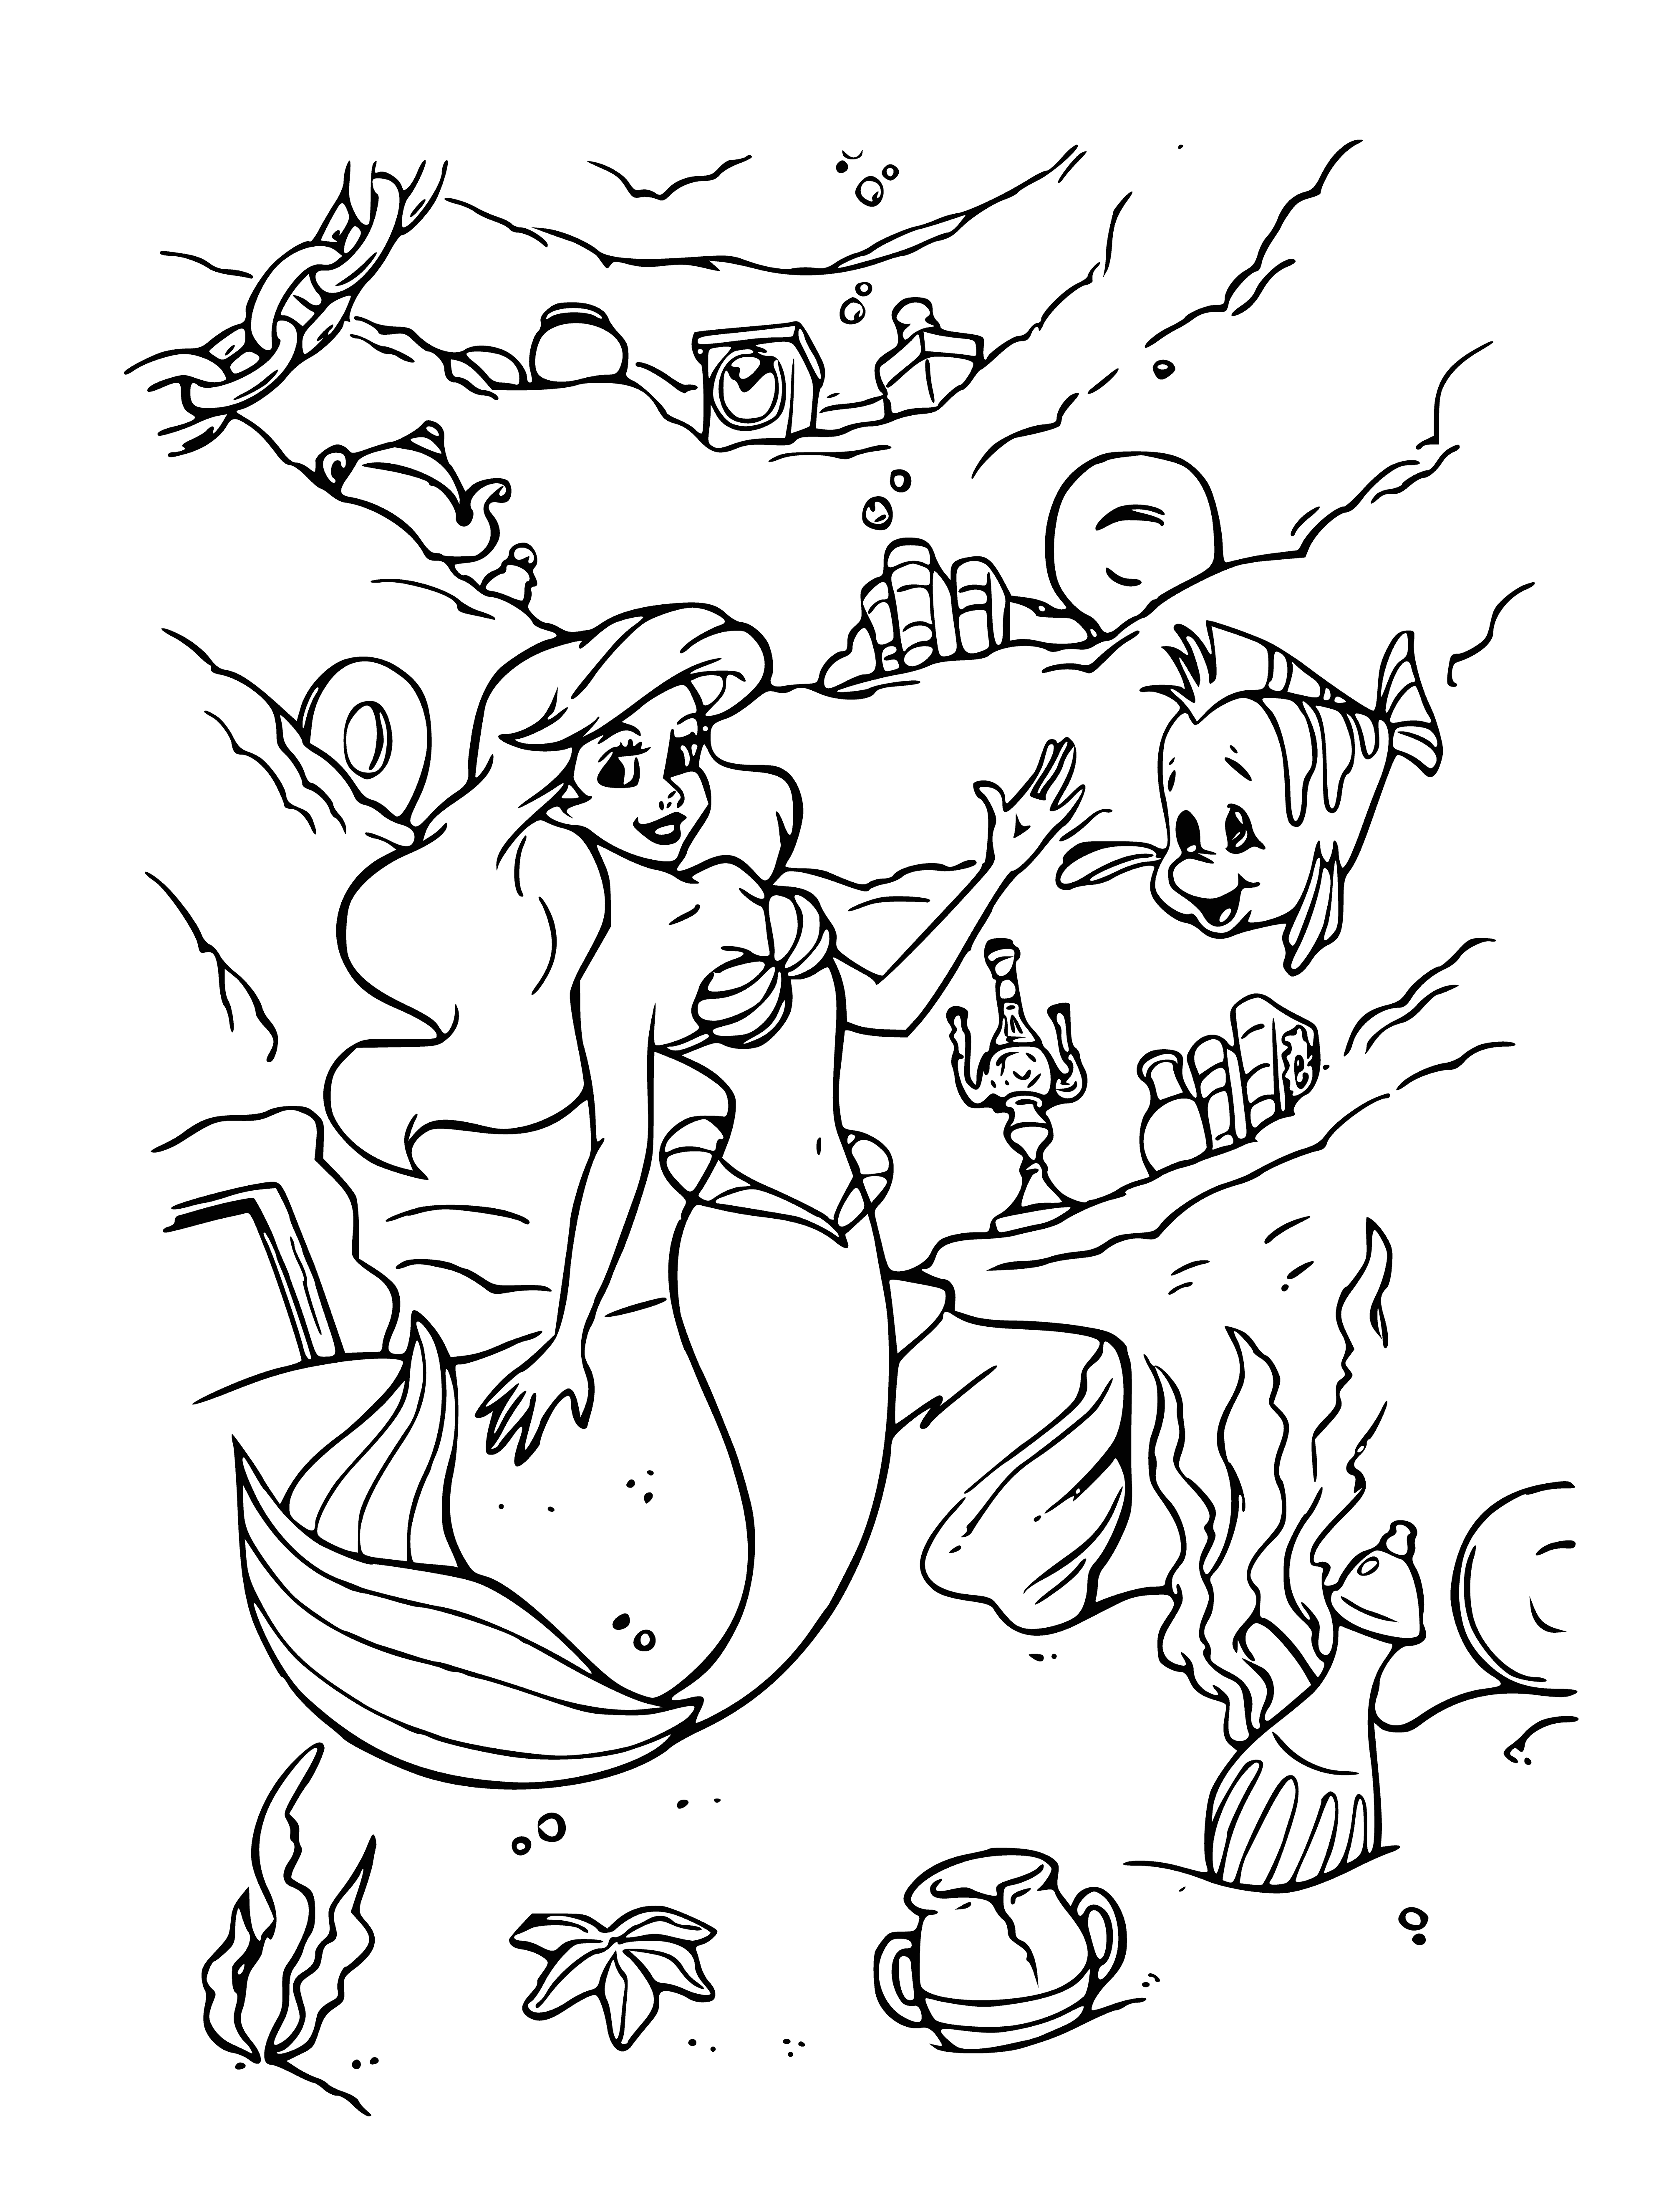 The Little Mermaid's Treasures coloring page